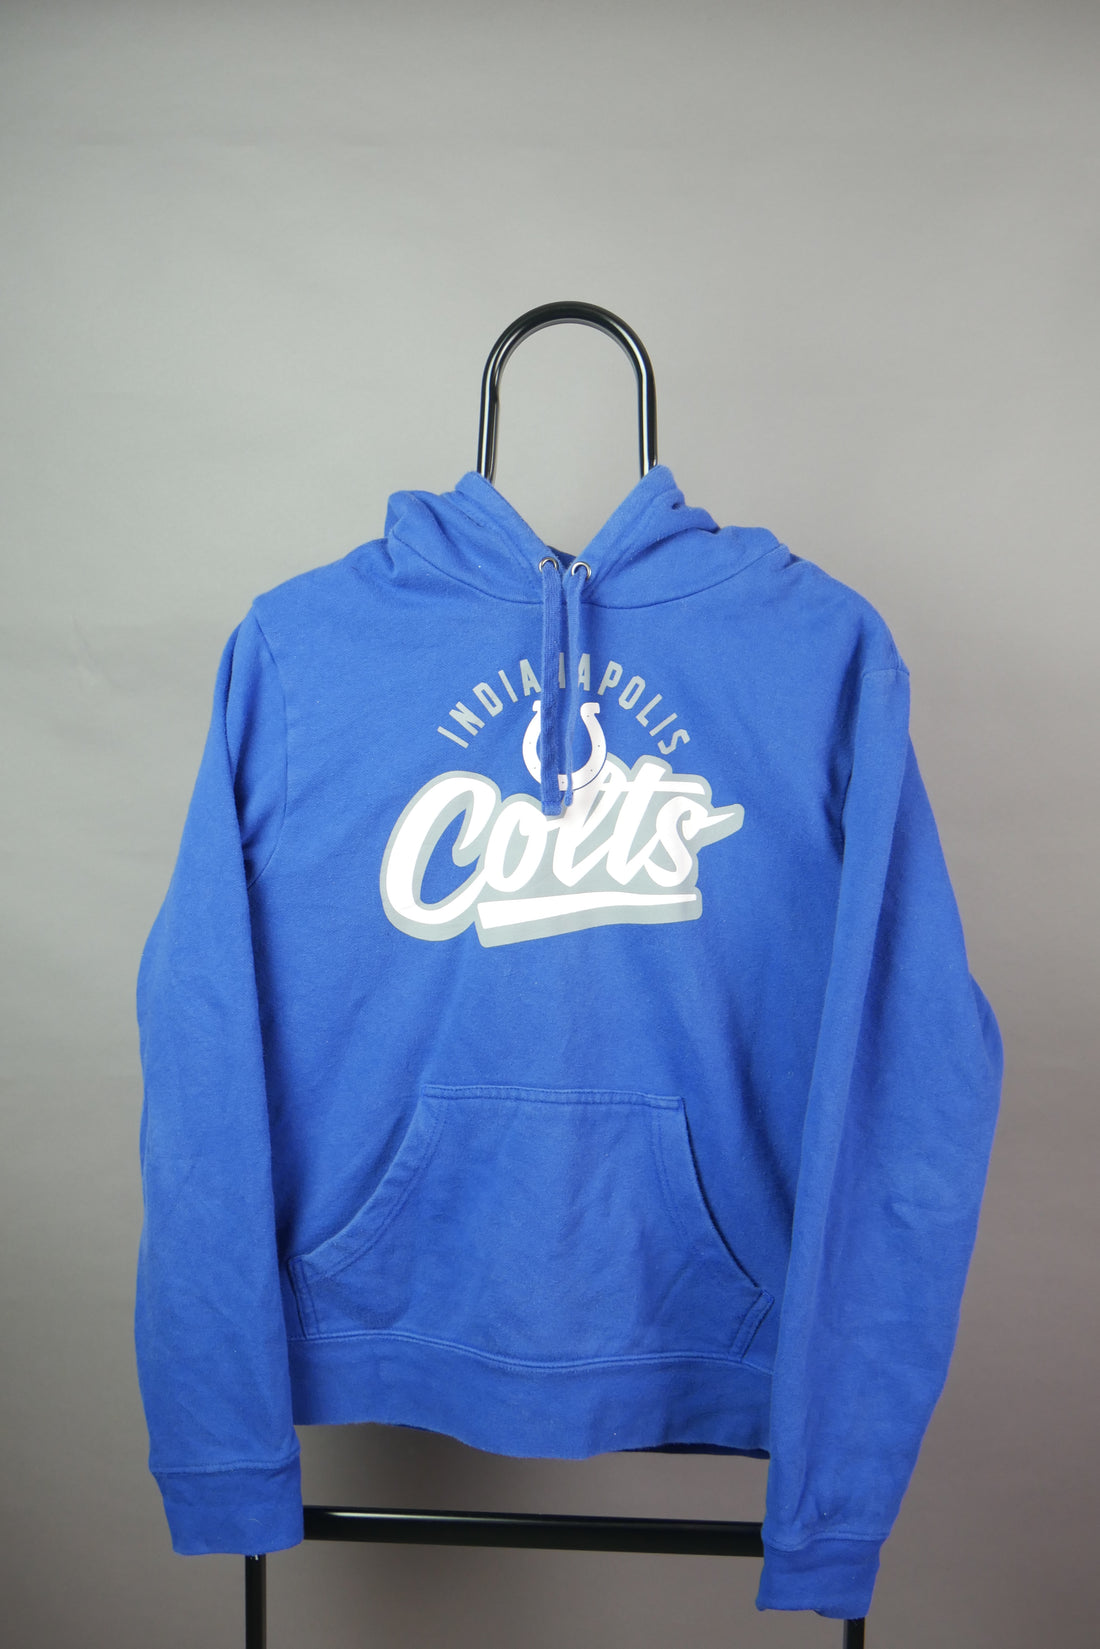 The Indianapolis Colts Hoodie (S)